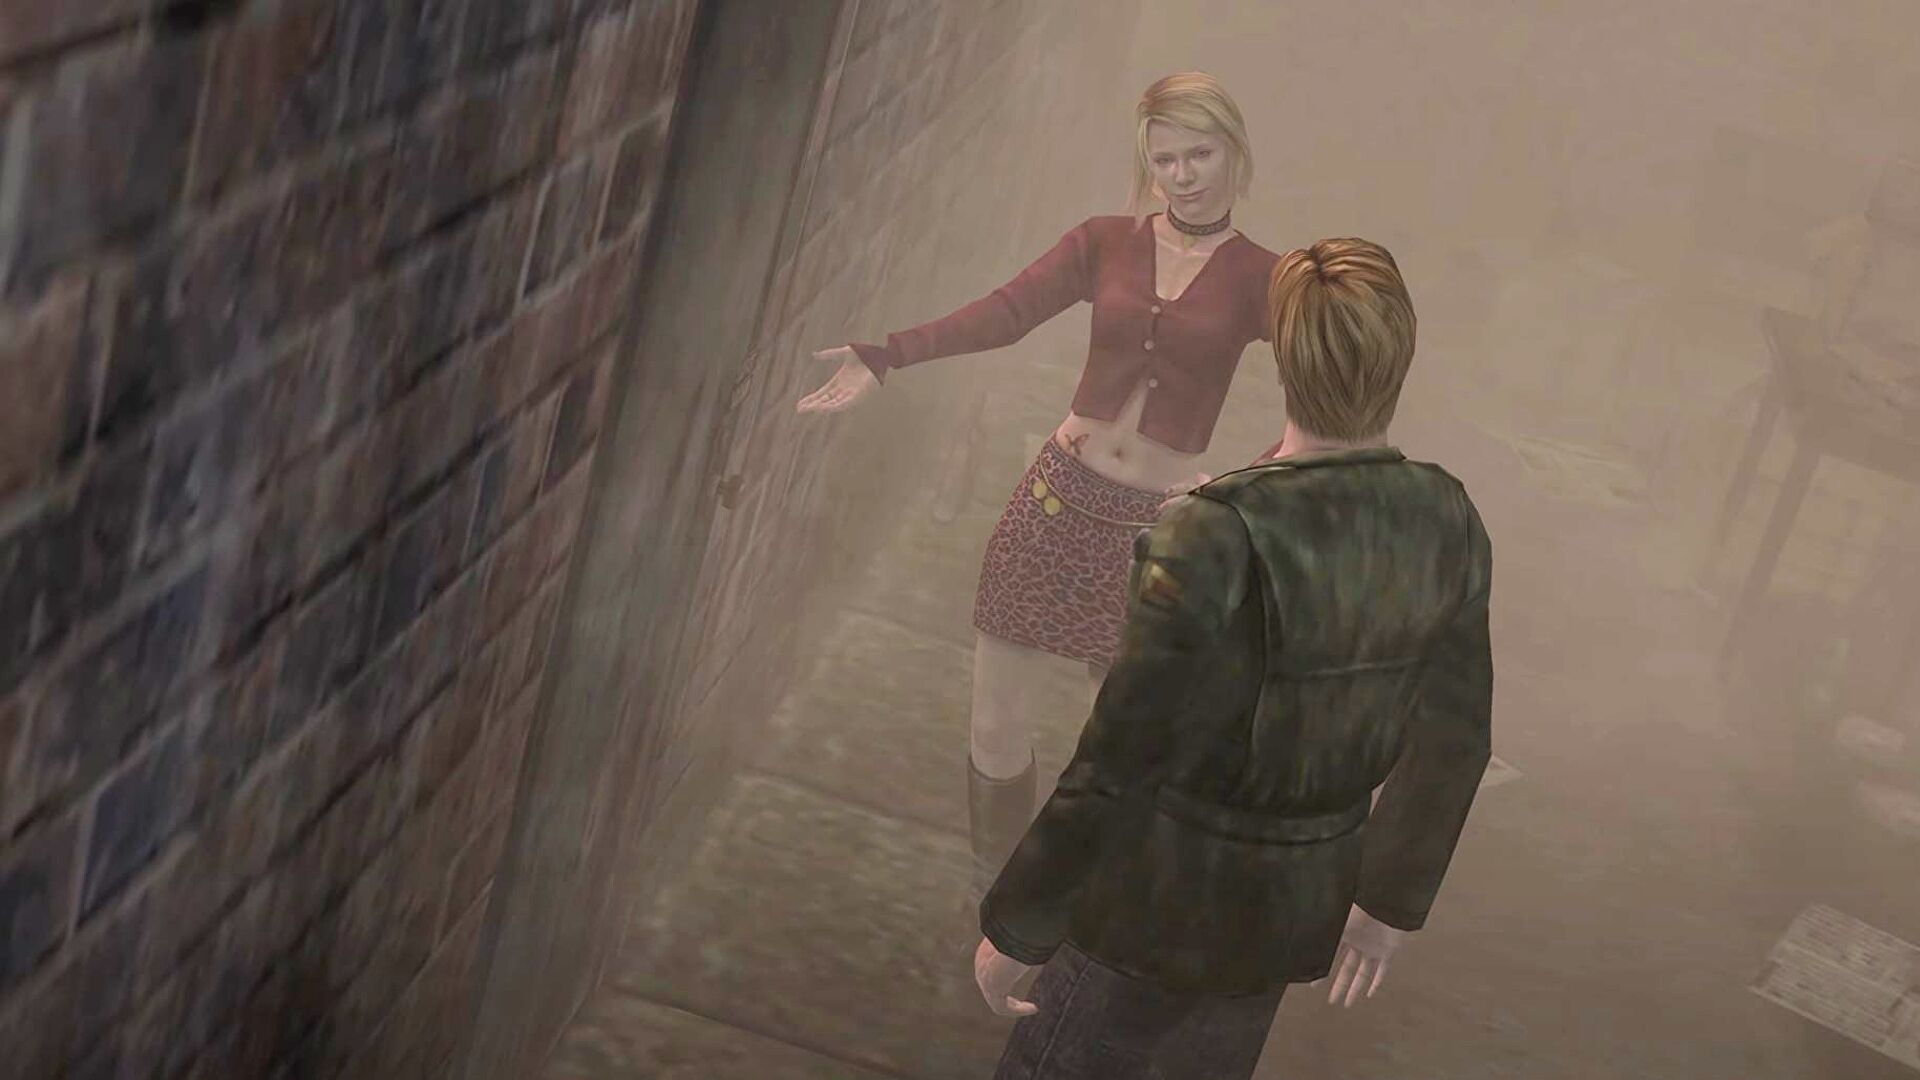 The Silent Hill 2 remake rumour train is chugging again thanks to some very blurry images